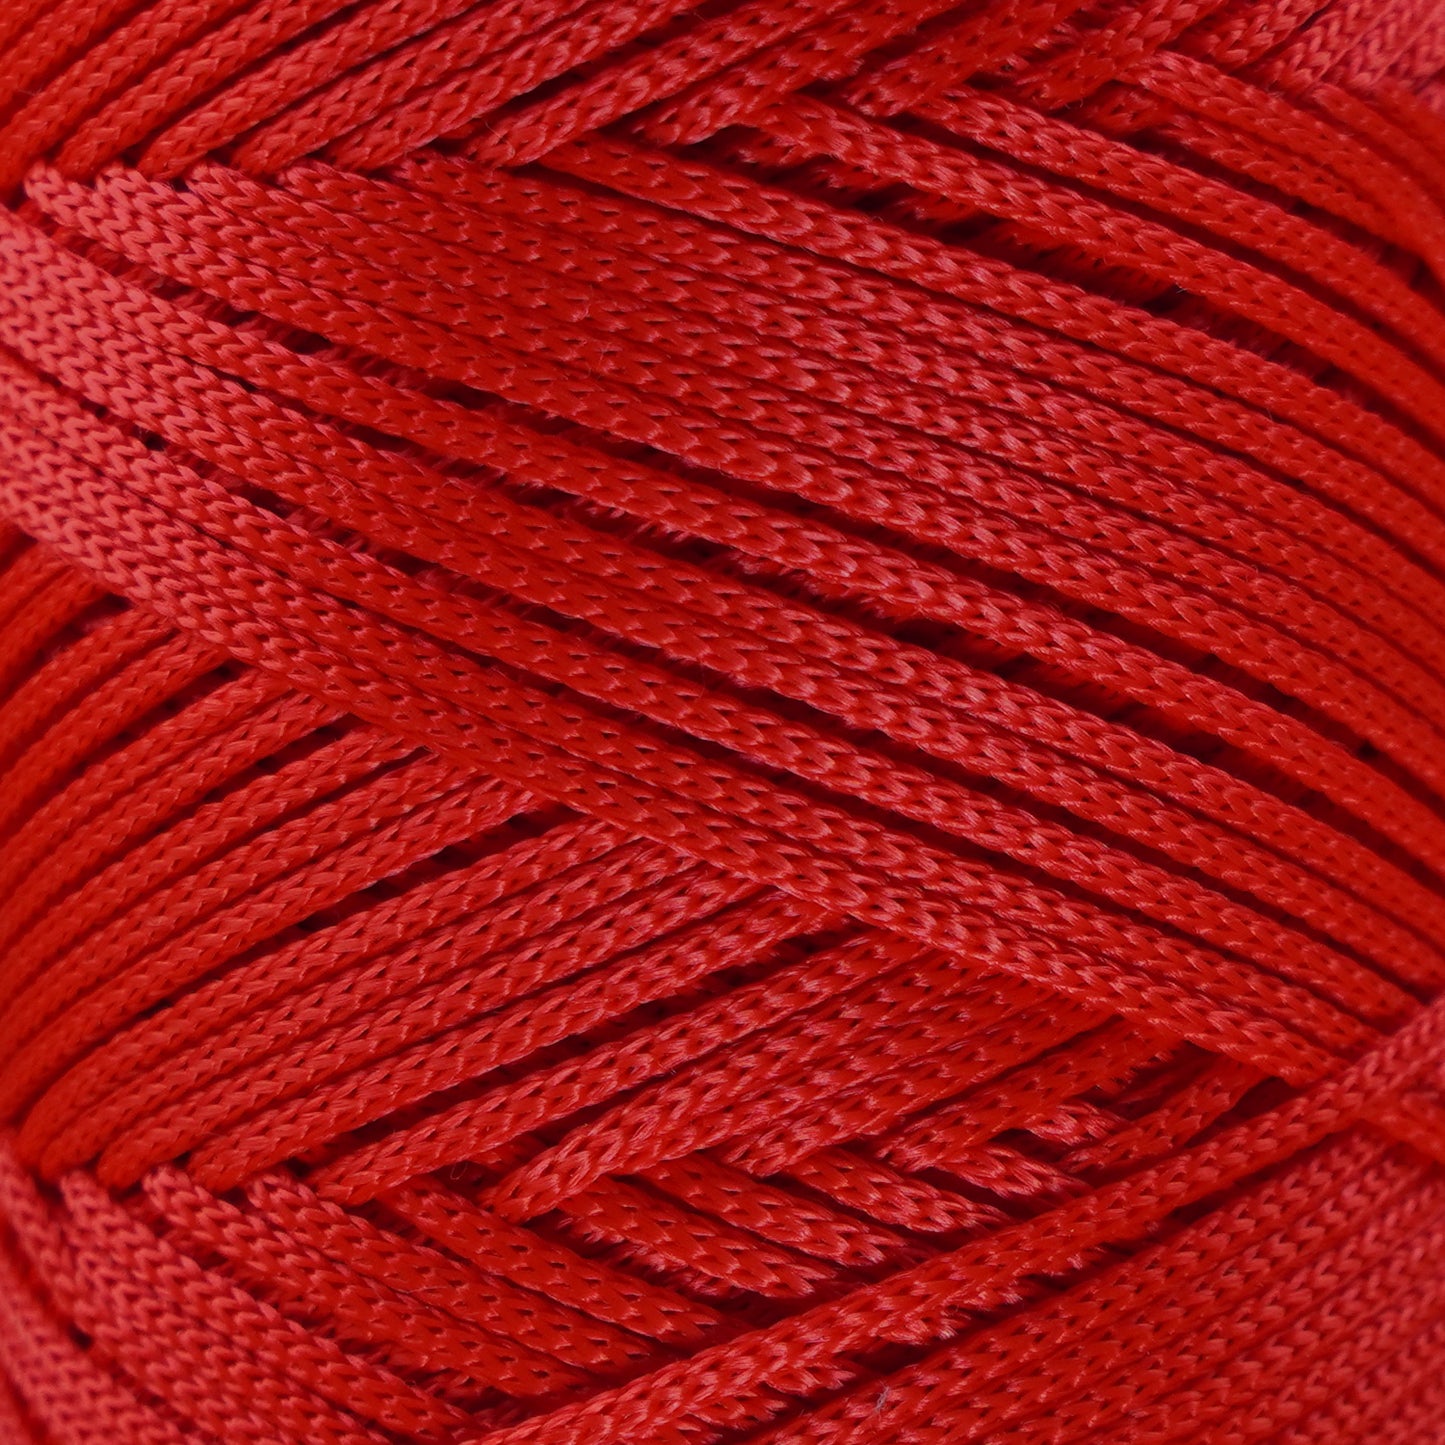 Polyester Macrame Cord 2mm x 250 yards (750 feet)  - Red